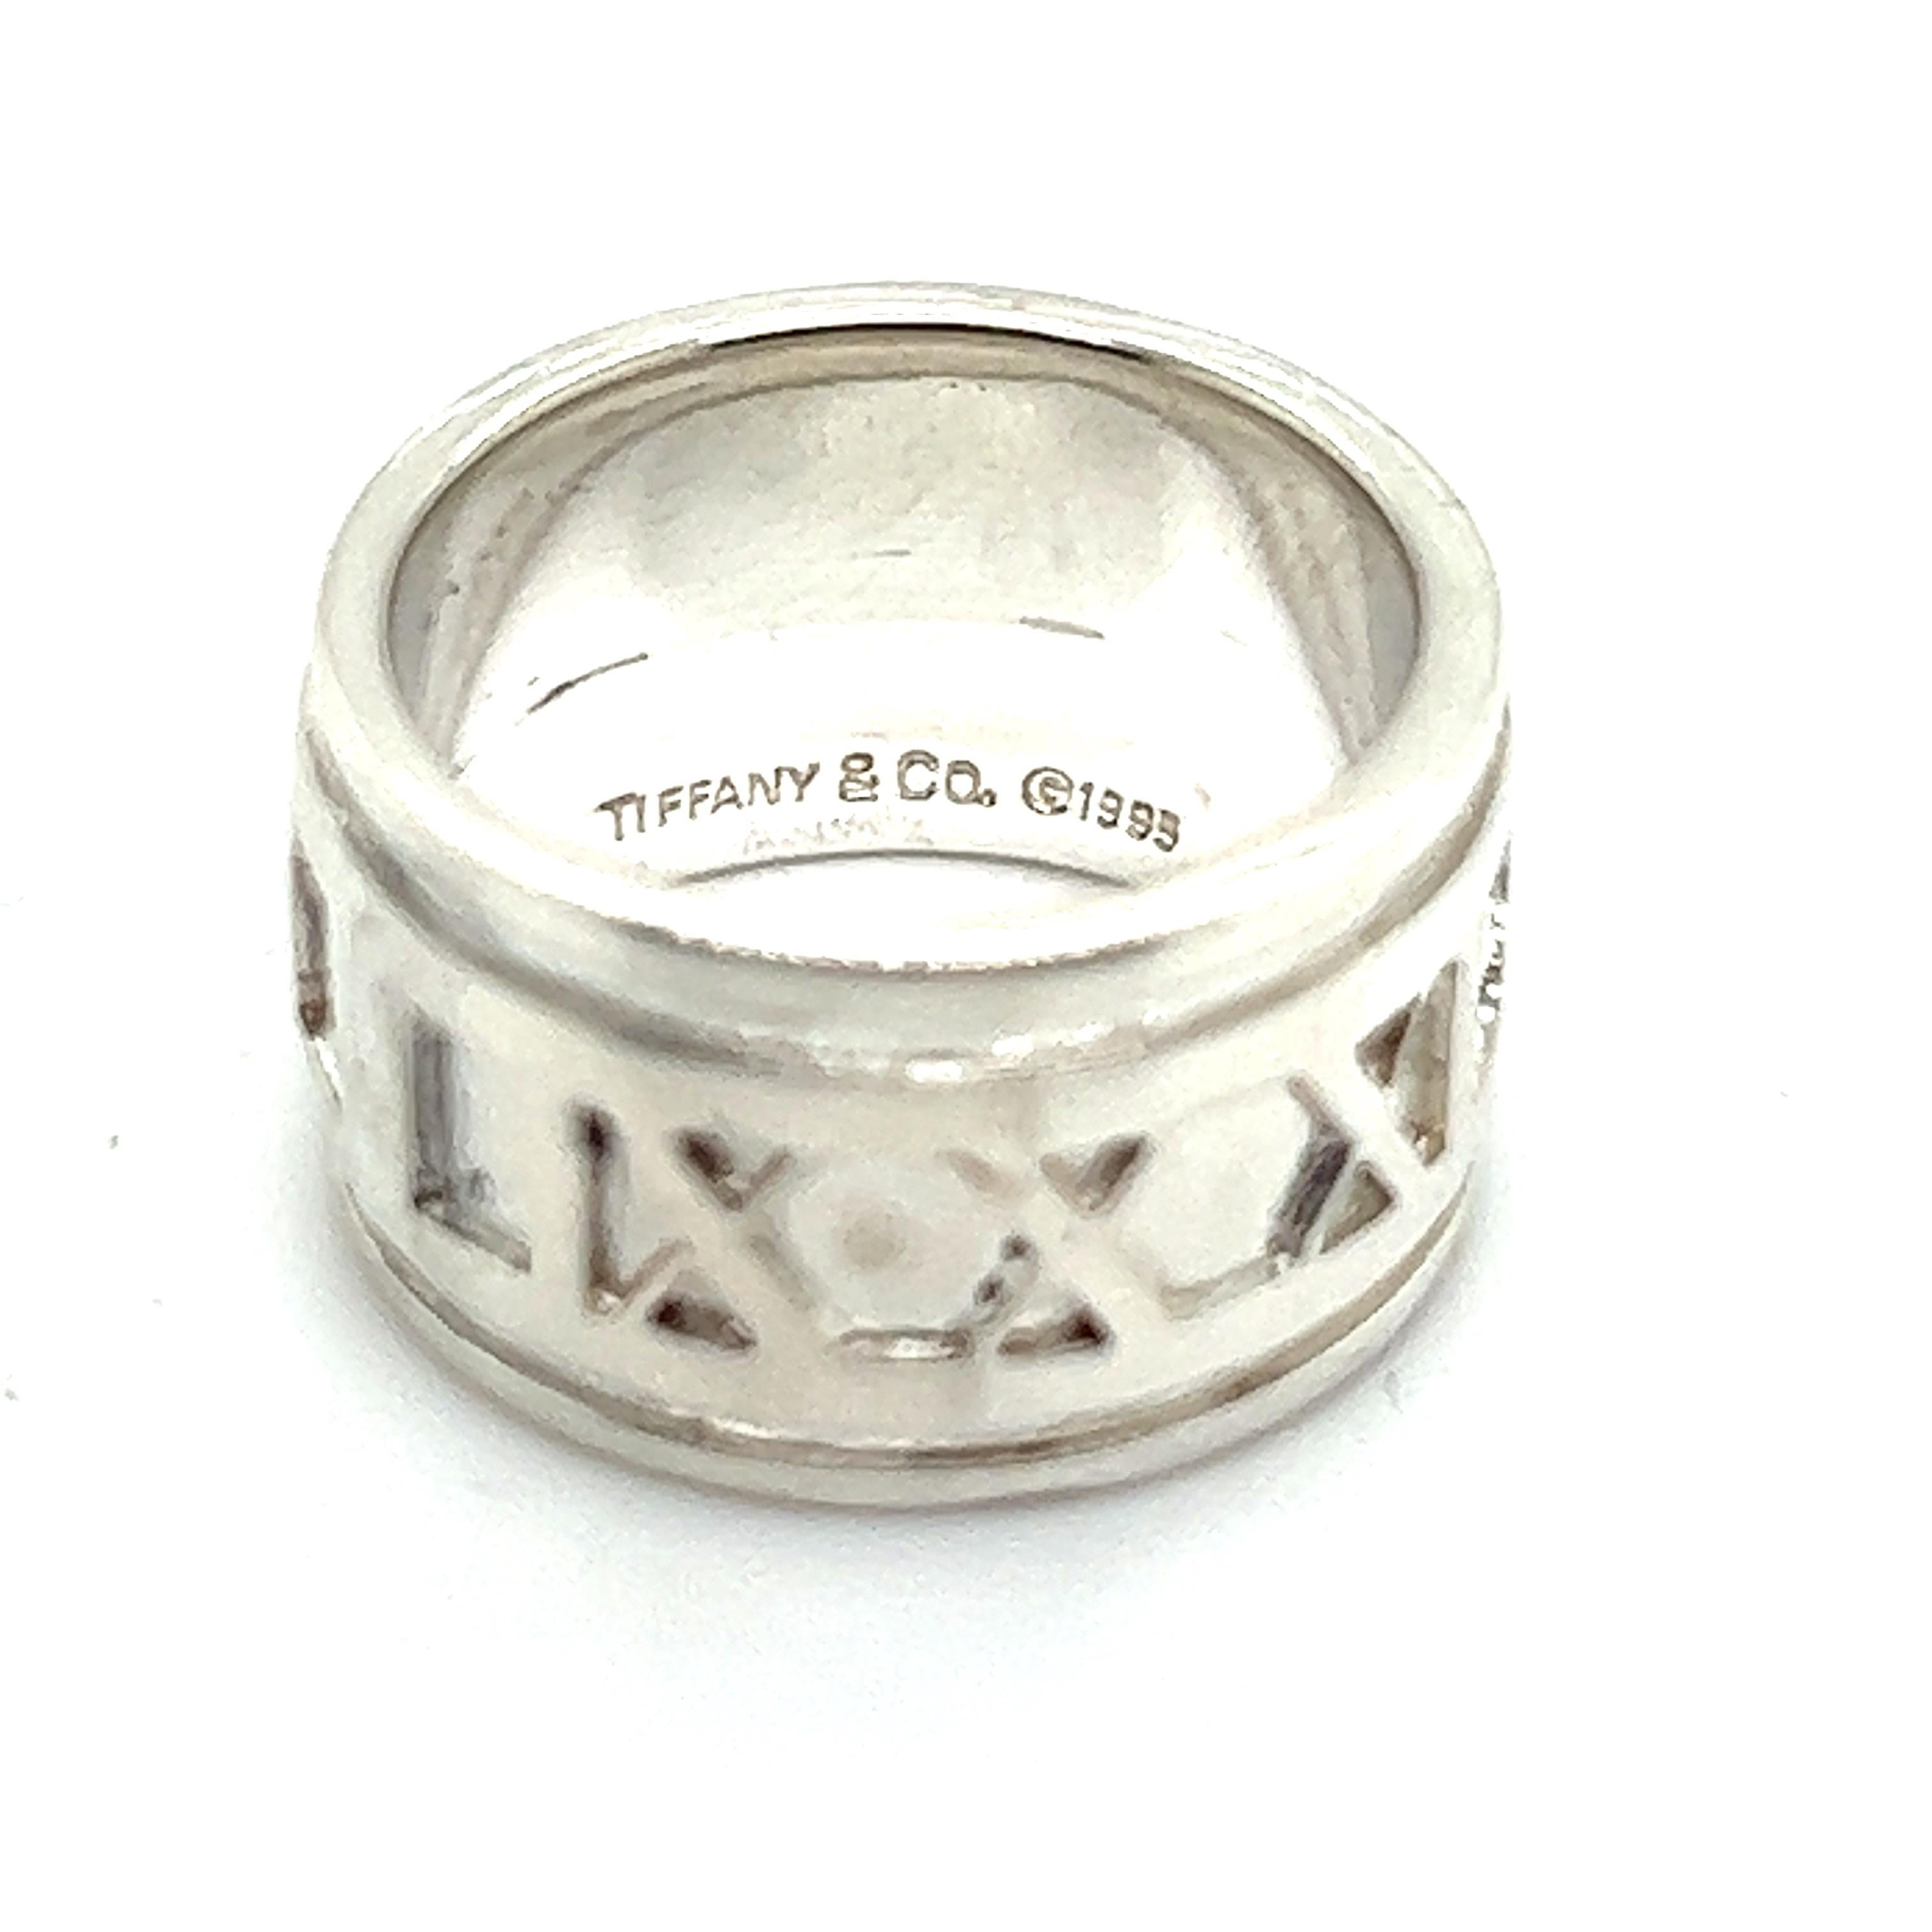 5.25 ring size in mm